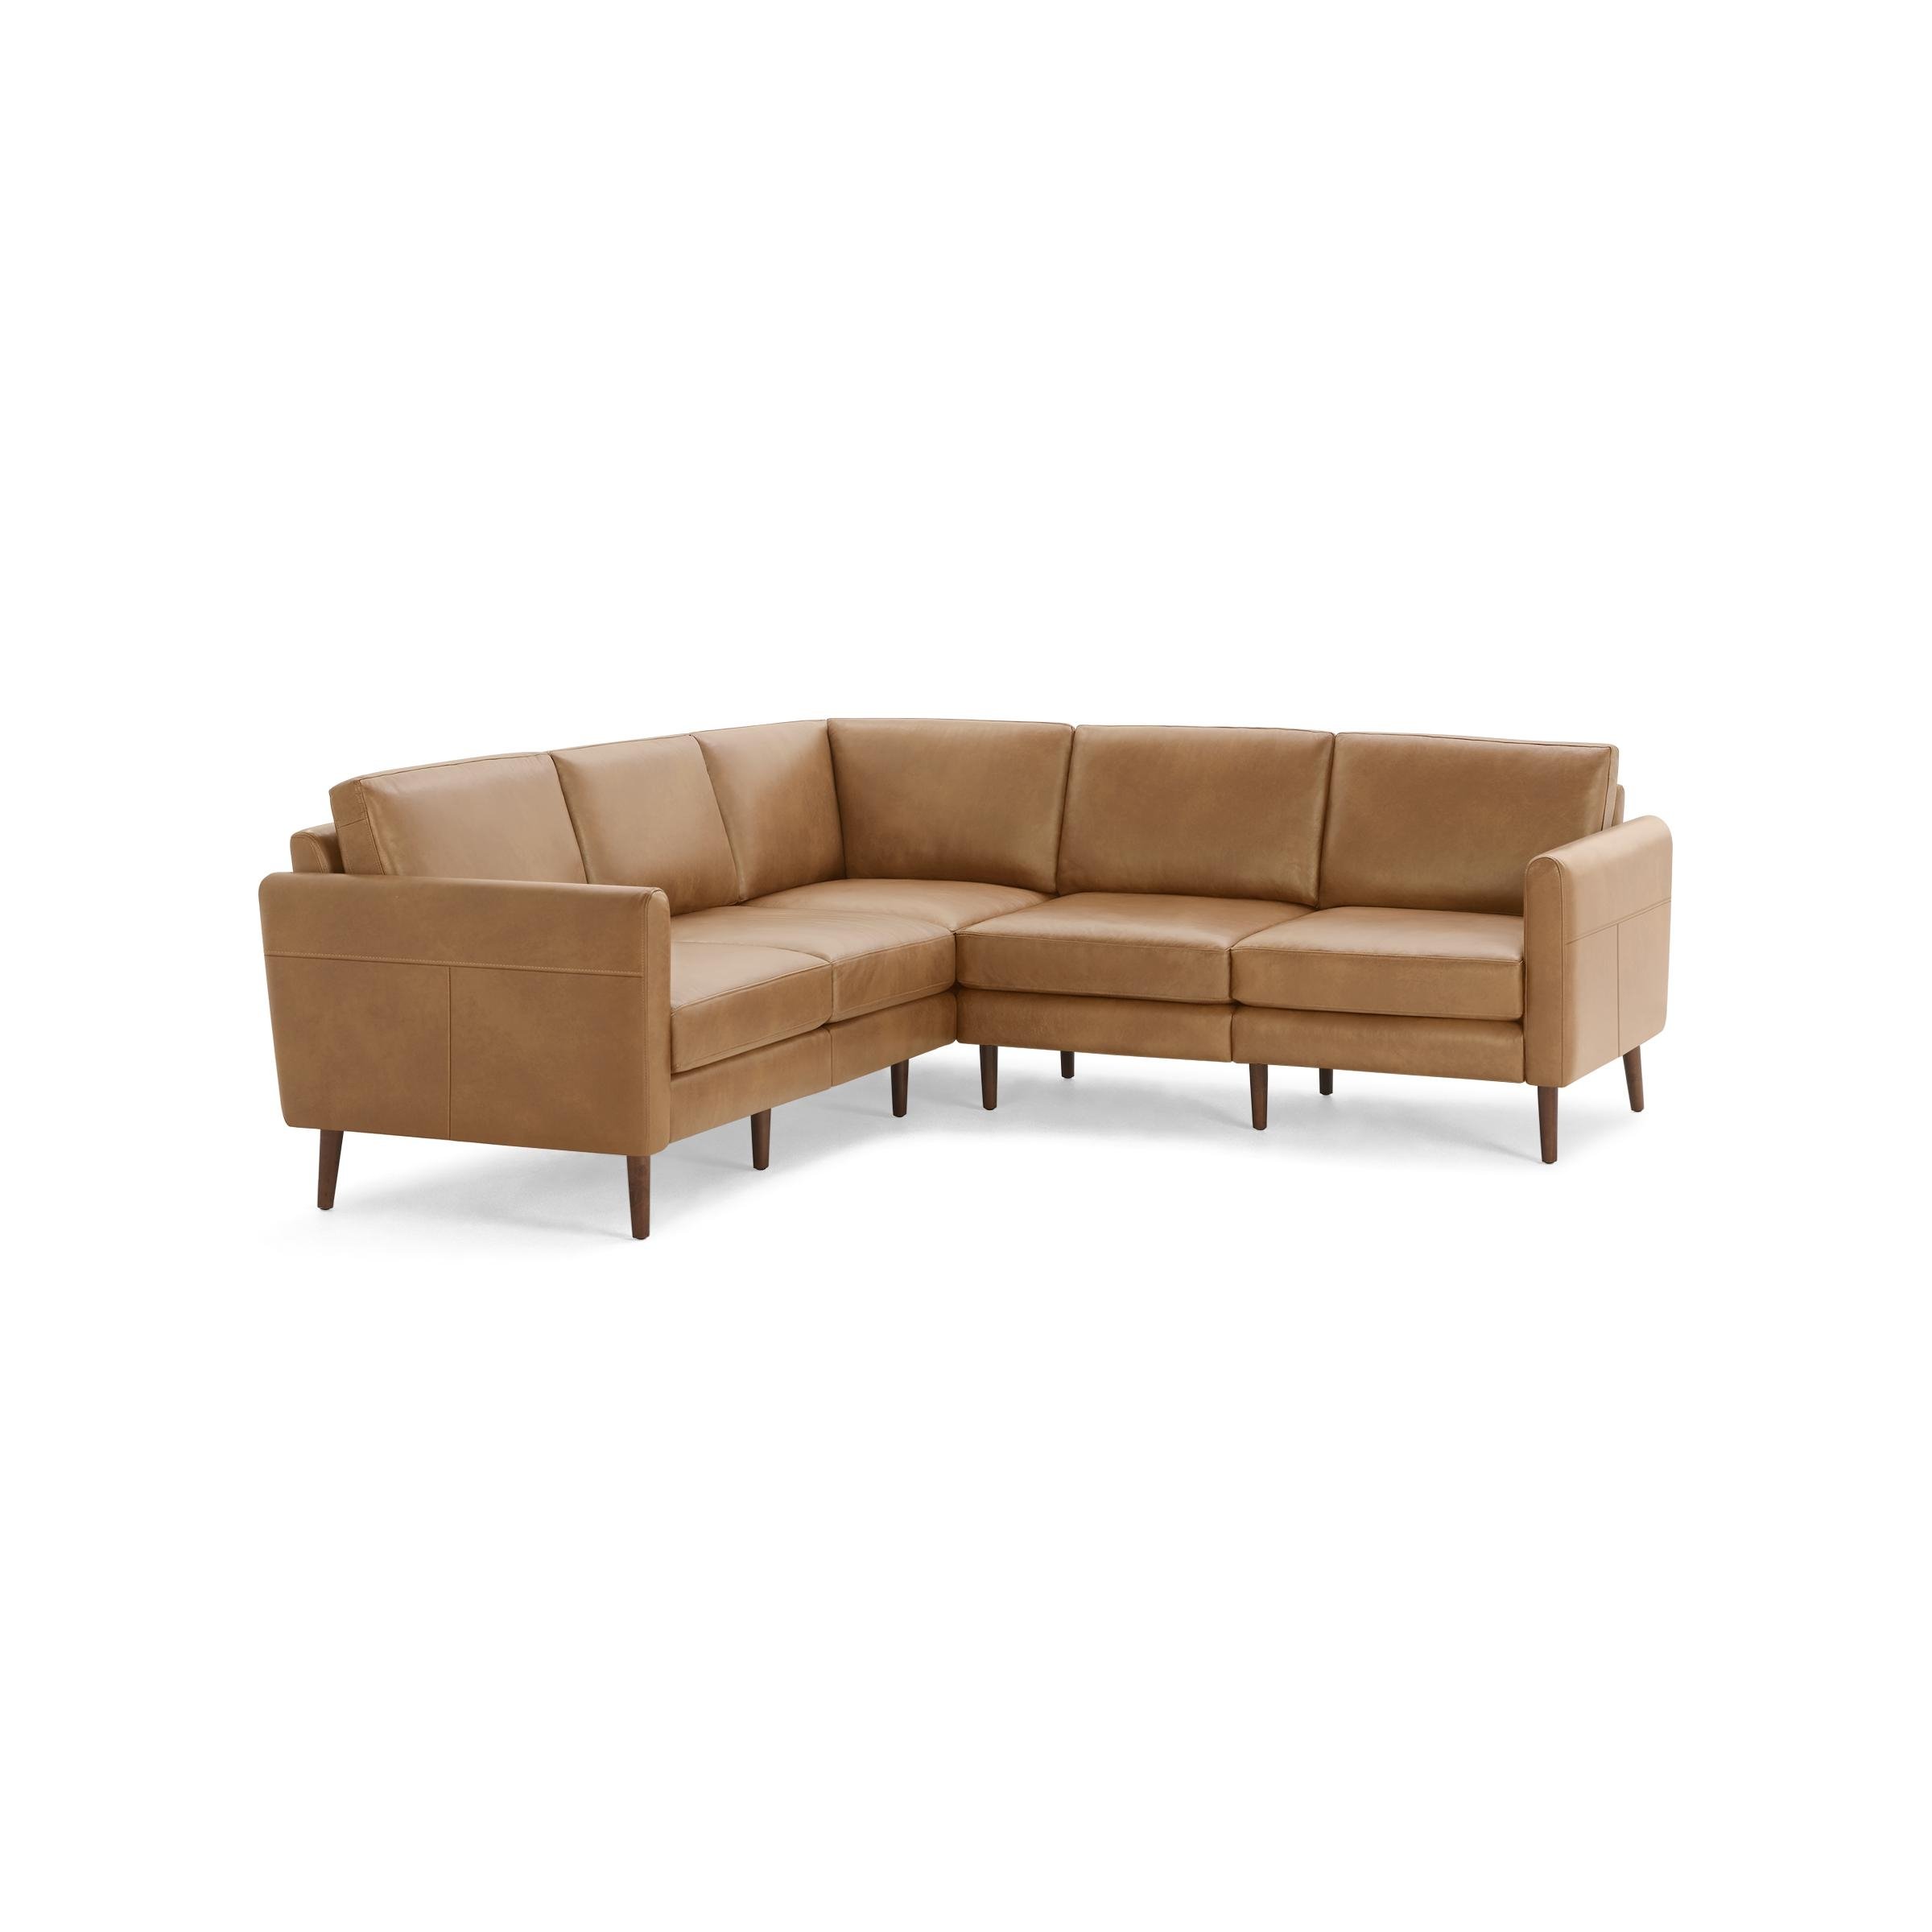 The Arch Nomad Leather 5-Seat Corner Sectional in Camel, Walnut Legs - Image 0